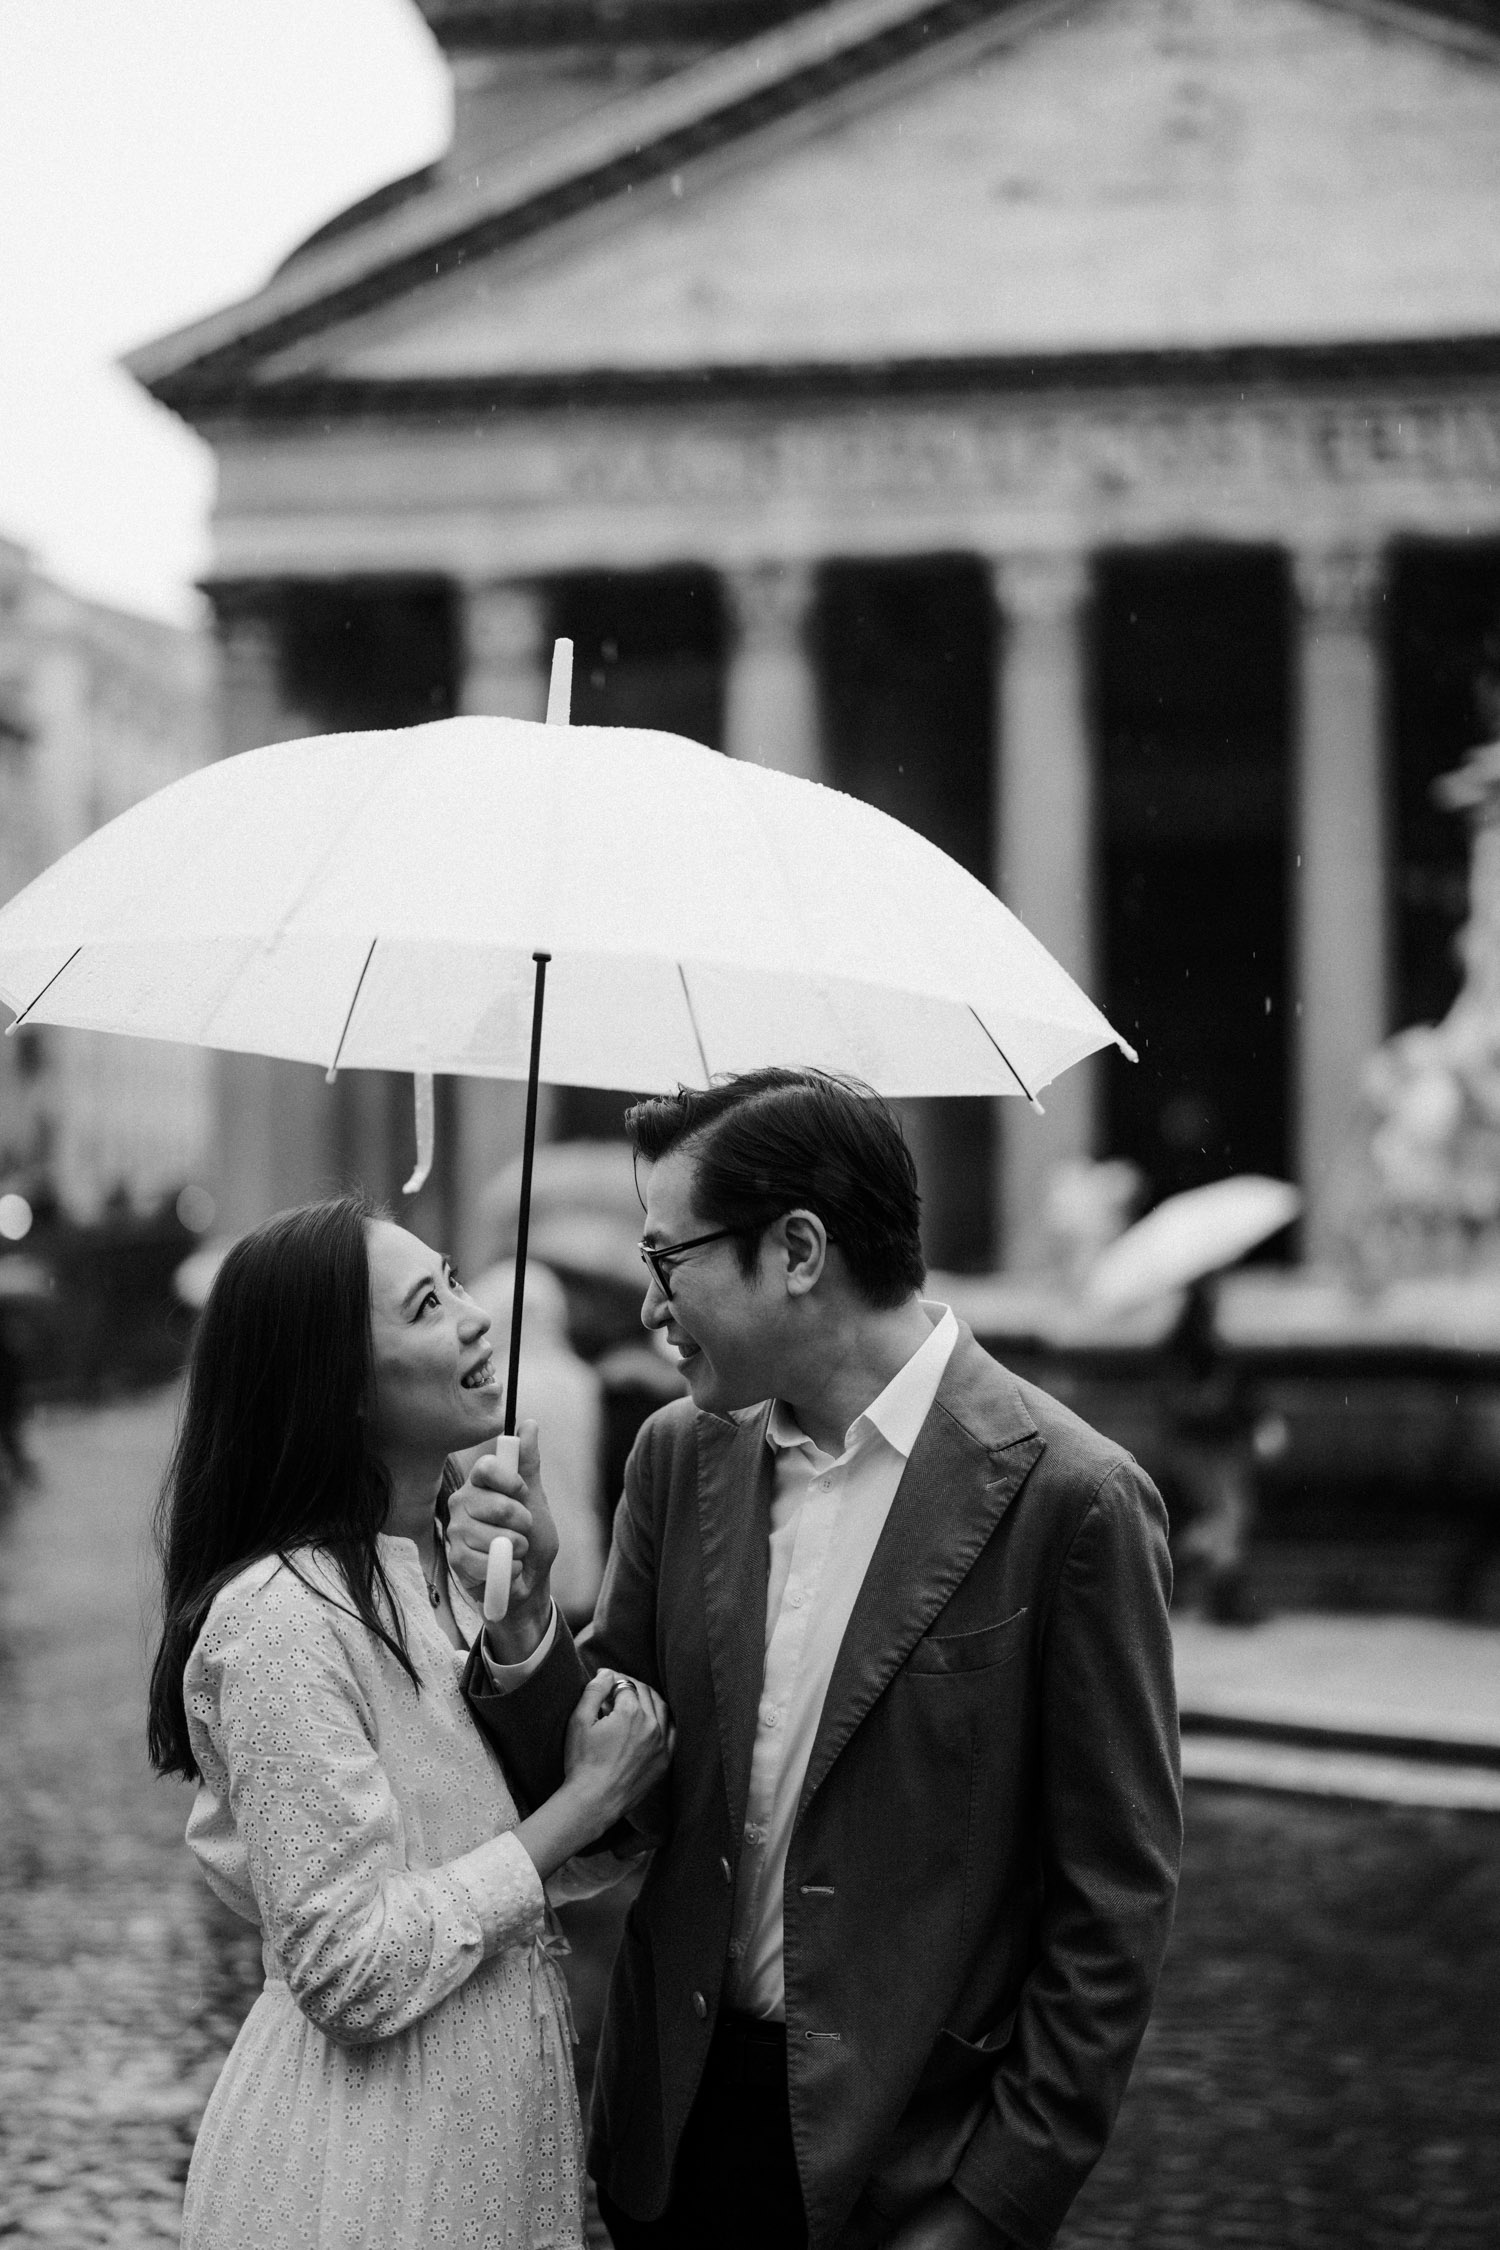 Love story photoshoot for a couple in Rome Italy